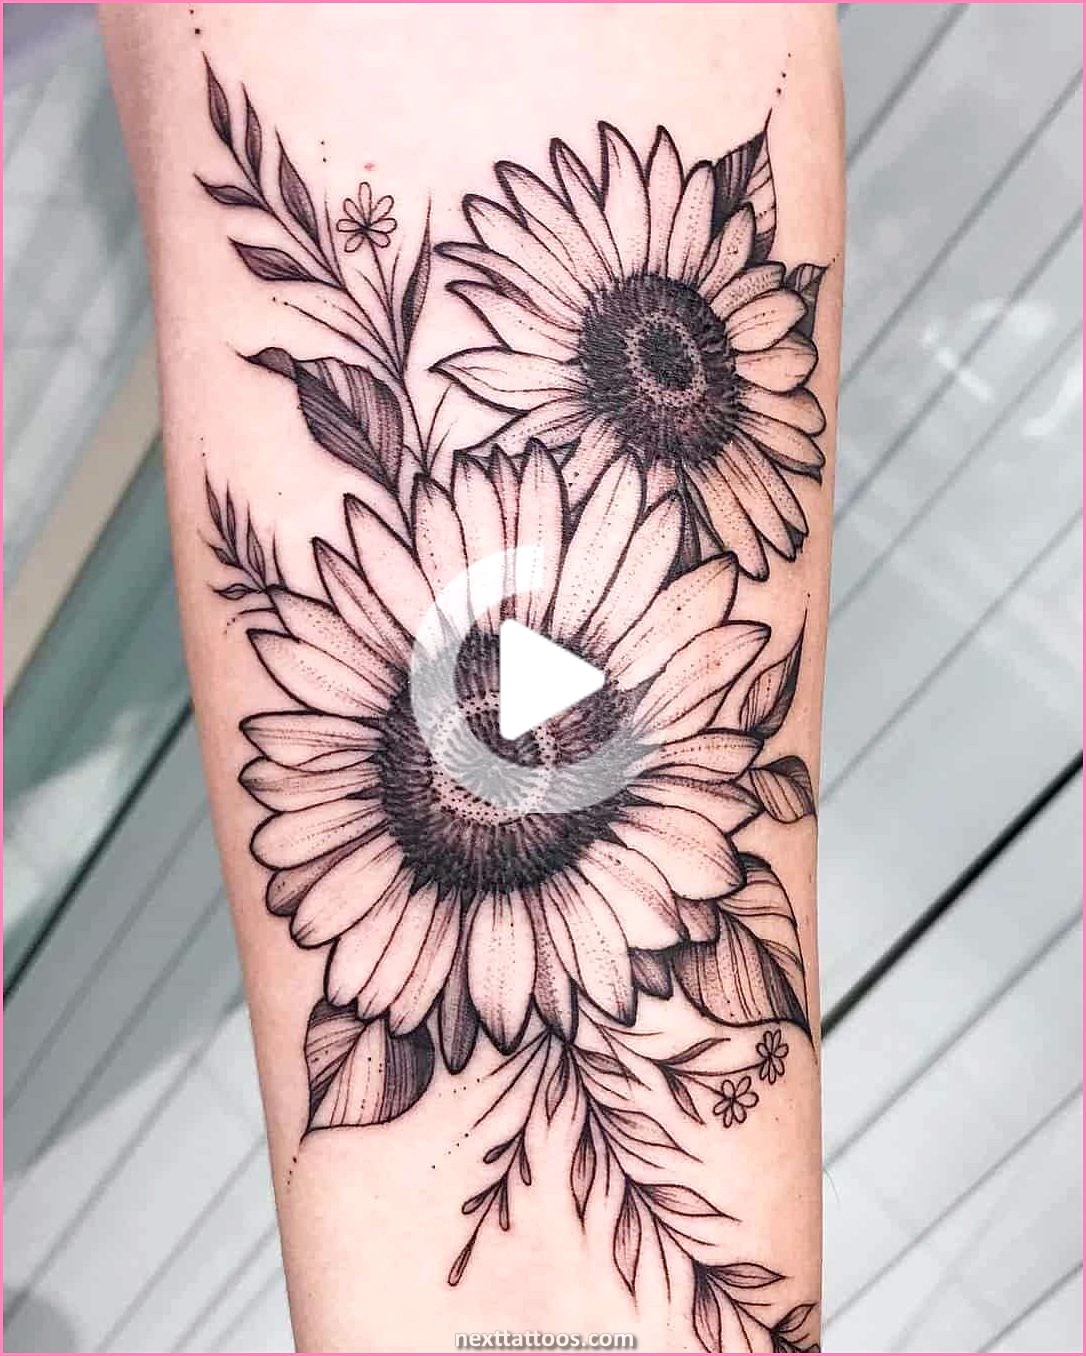 Sunflower Tattoo - The Meaning of a Sunflower Tattoo